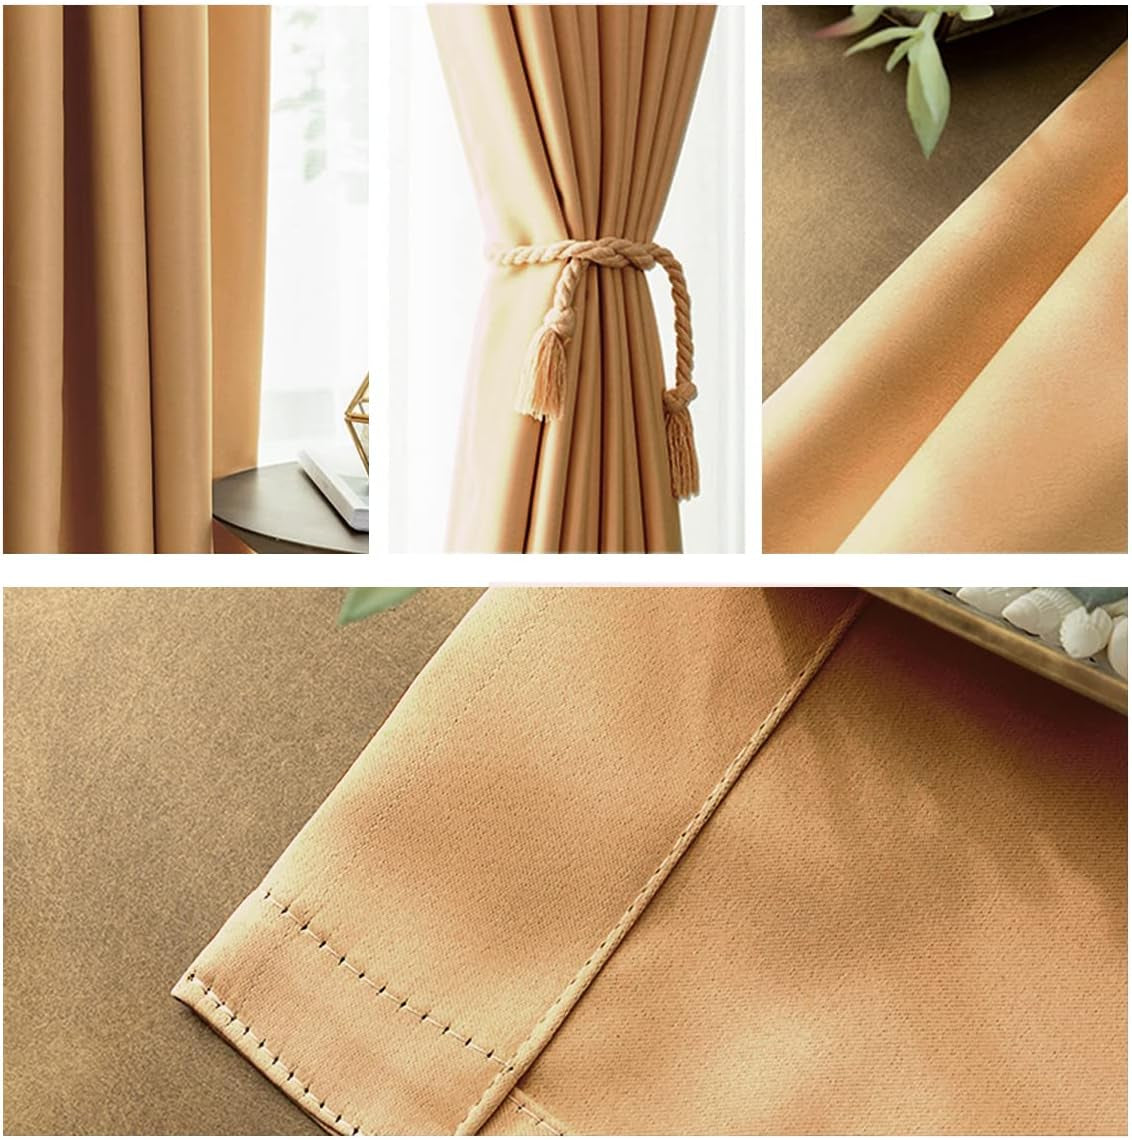 IYUEGO Pinch Pleat Solid Thermal Insulated 95% Wheatout Patio Door Curtain Panel Drape for Traverse Rod and Track, Wheat 52" W X 84" L (One Panel)  I Love Curtains   